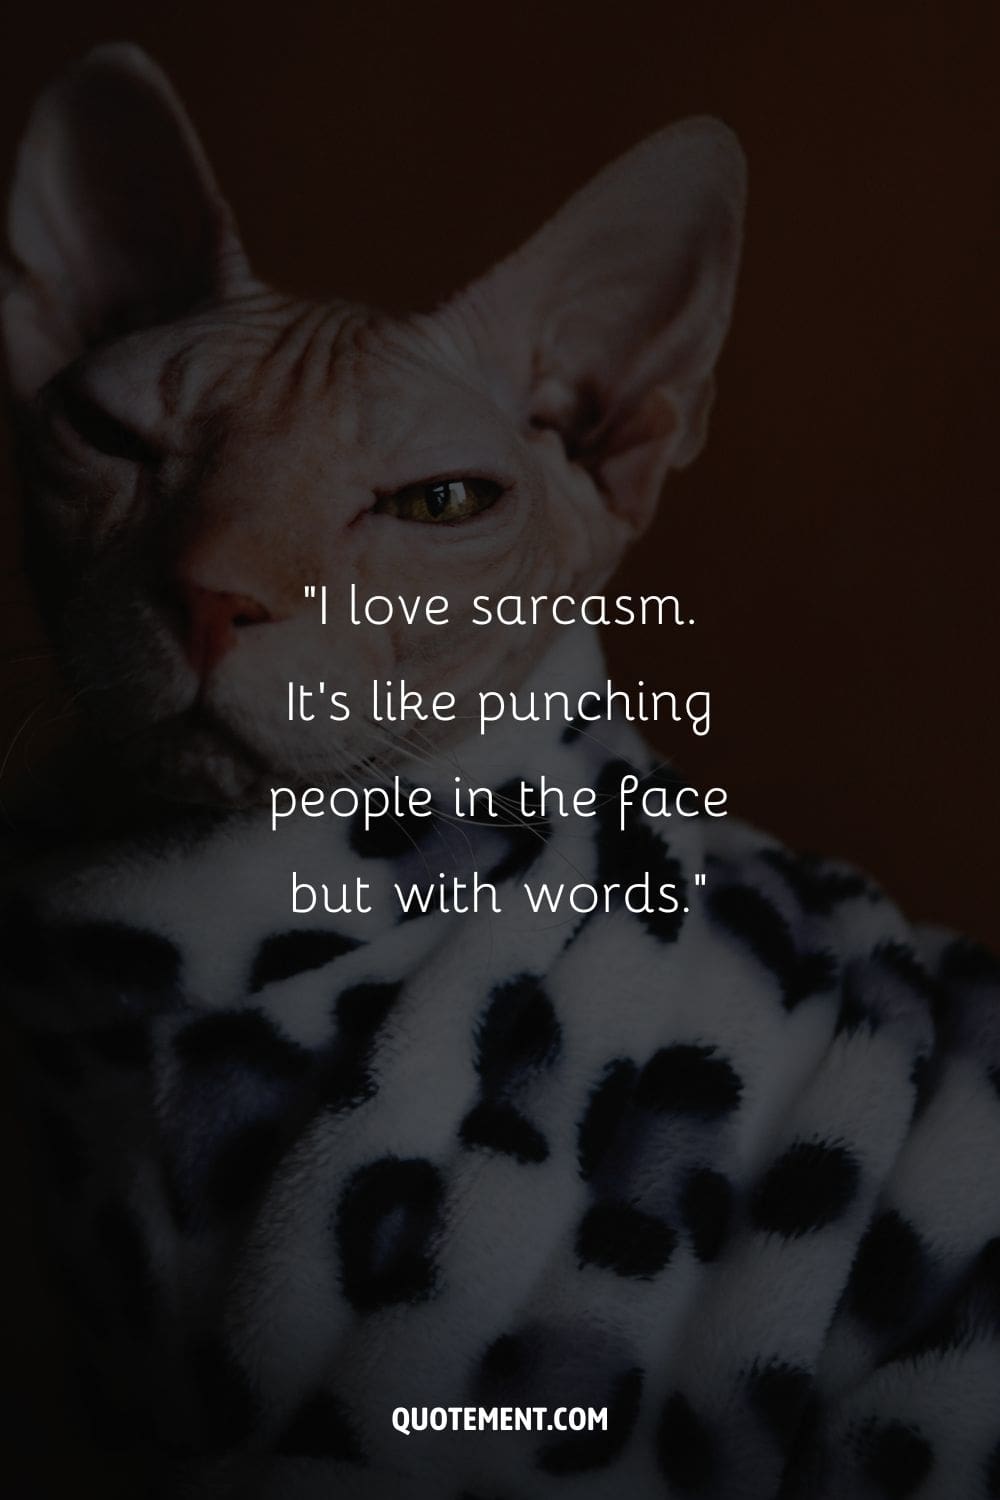 “I love sarcasm. It’s like punching people in the face but with words.” ― Unknown